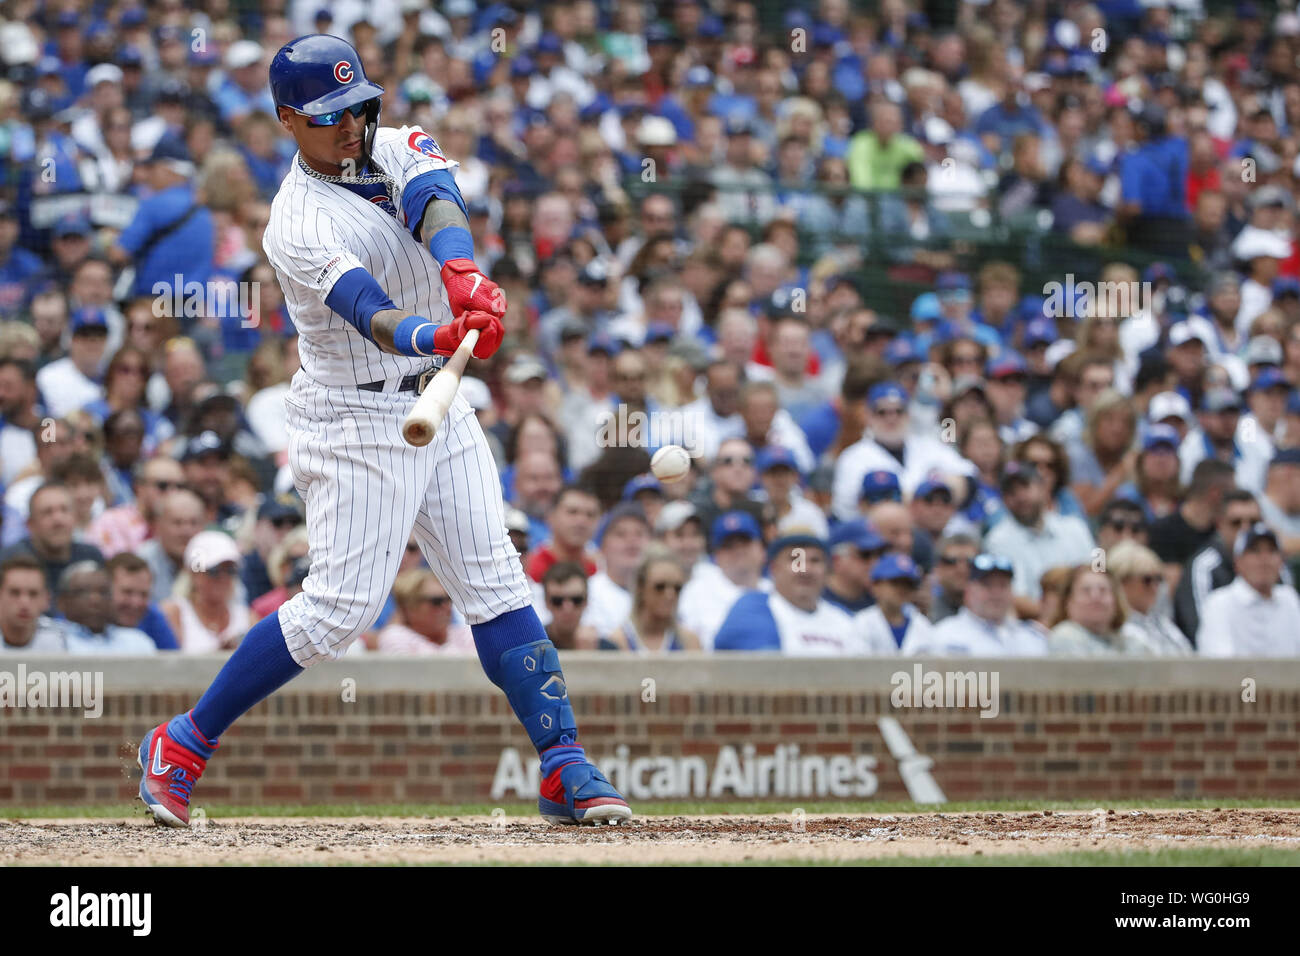 Chicago, USA. 31st Aug, 2019. Chicago Cubs shortstop Javier Baez hits a single against the Milwaukee Brewers in the sixth inning at Wrigley Field on Saturday, August 31, 2019 in Chicago. Credit: UPI/Alamy Live News Stock Photo